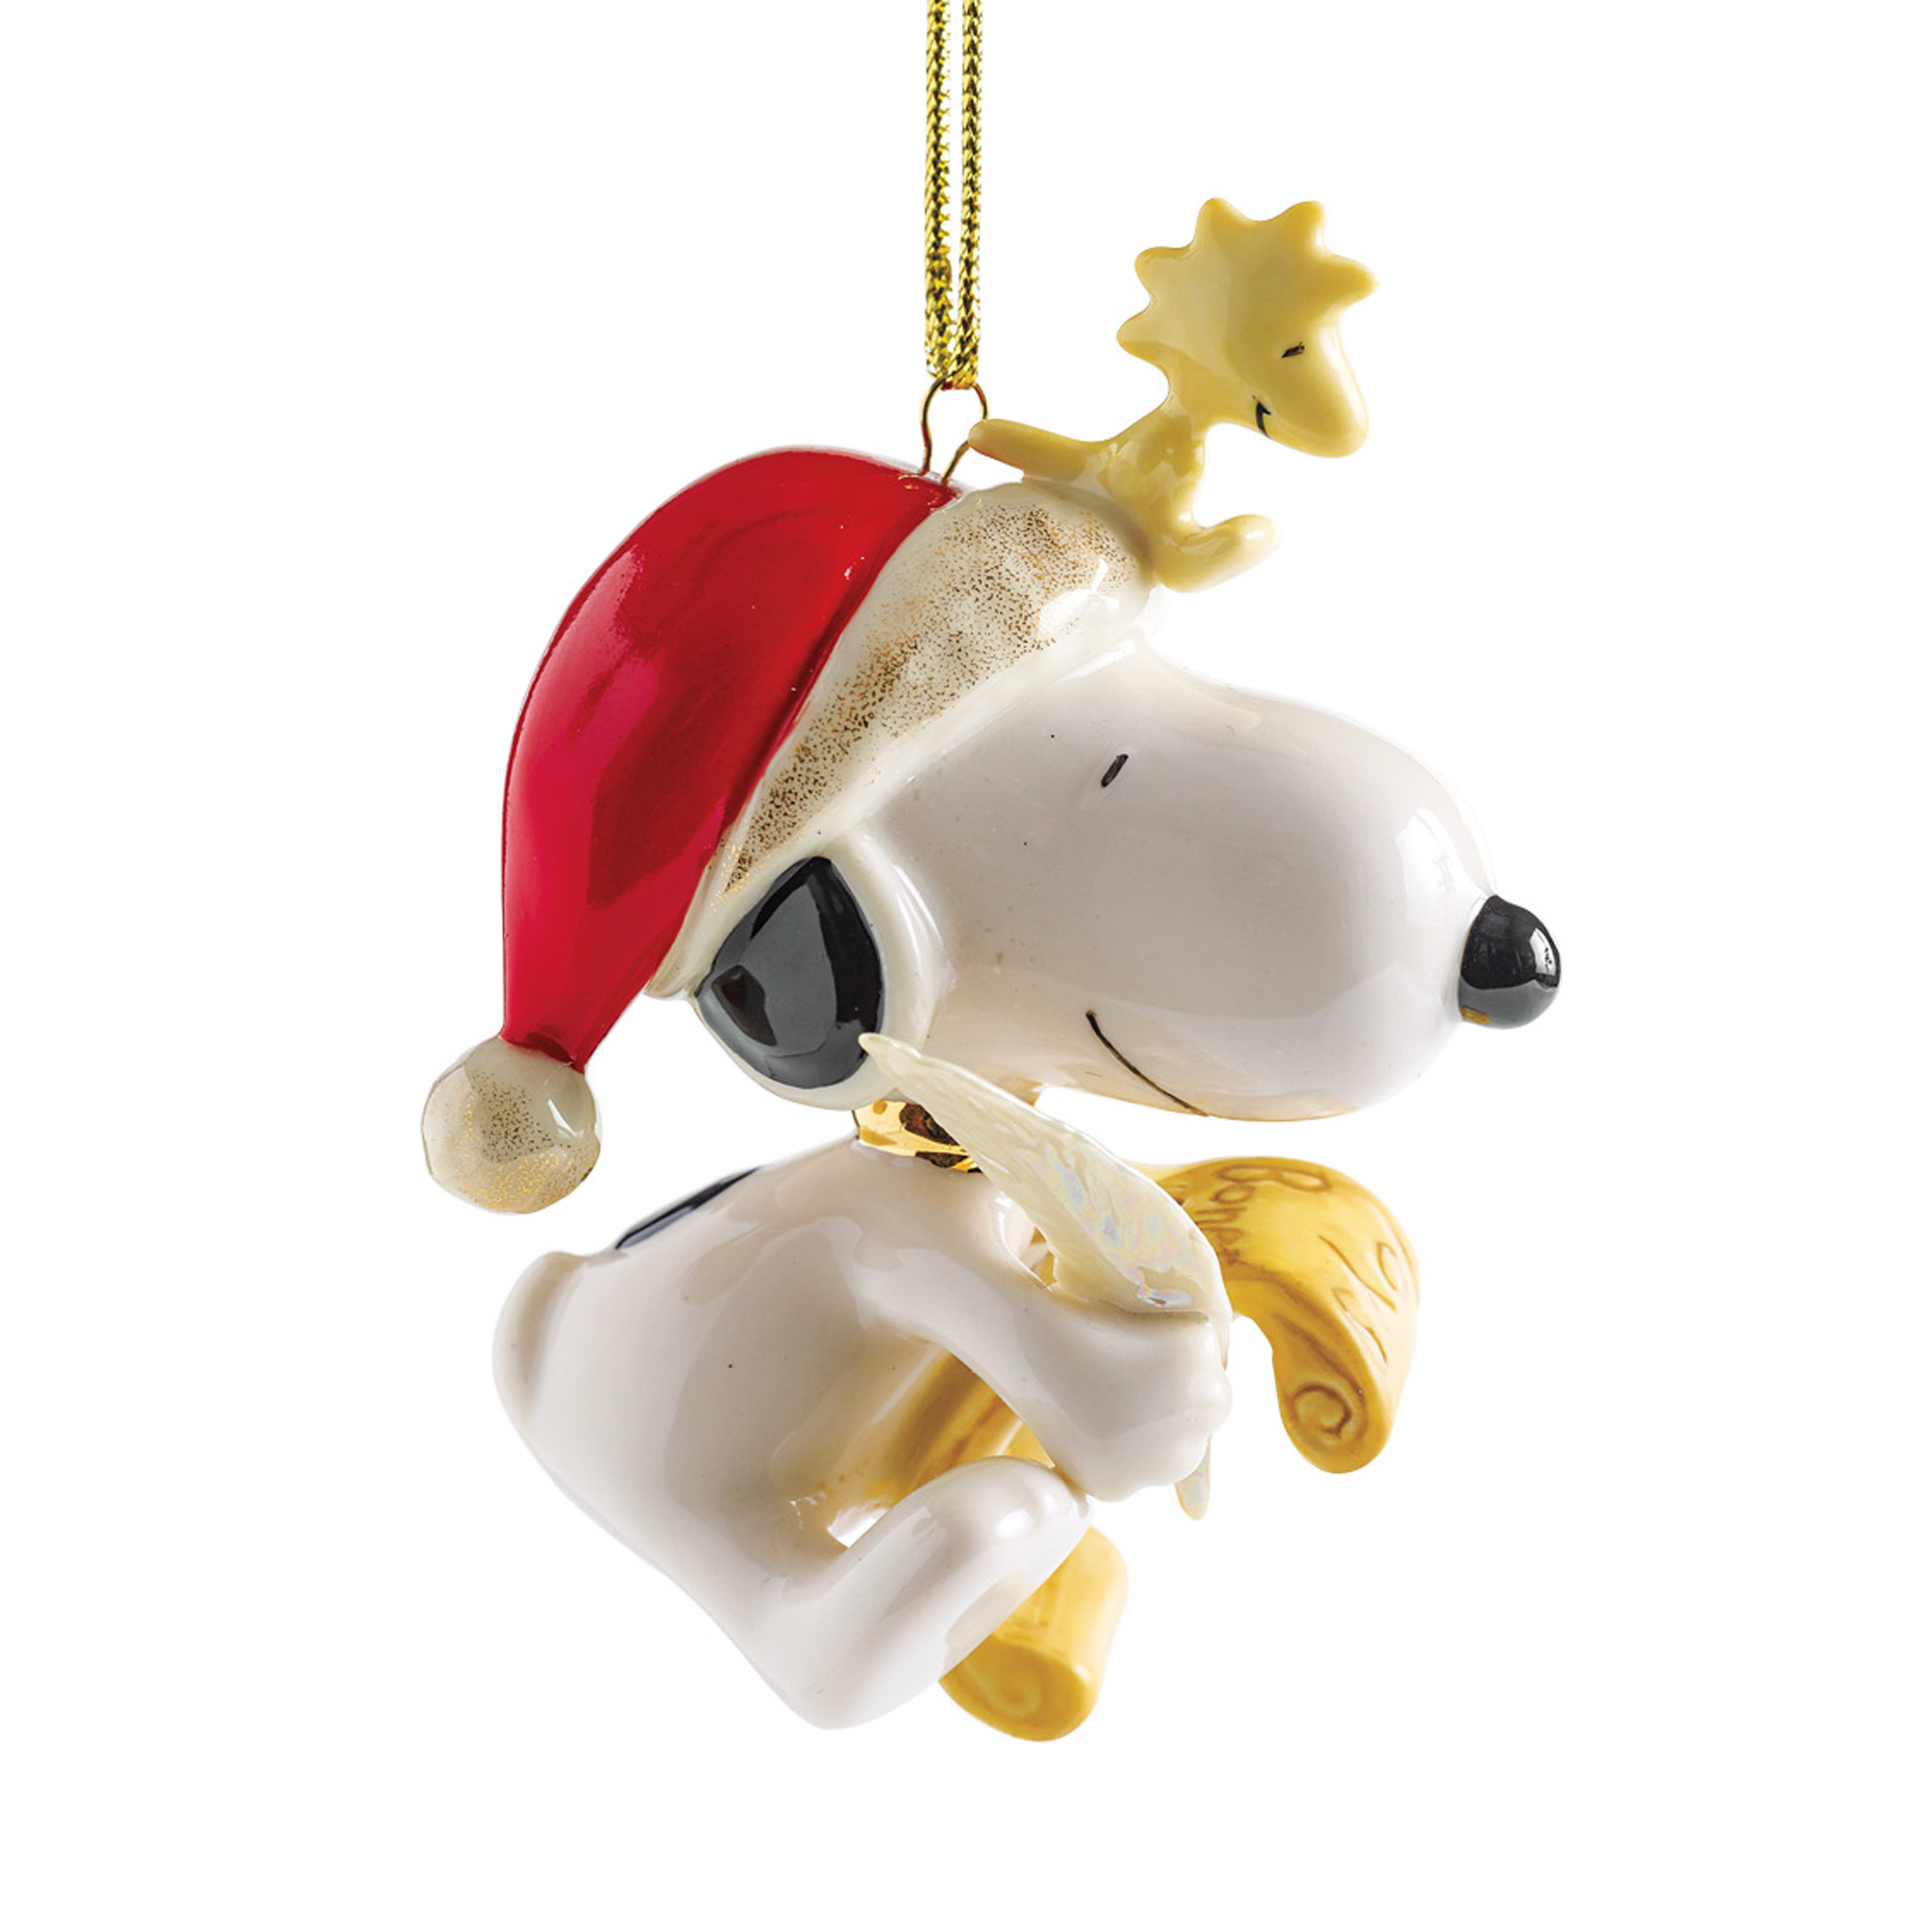 Christmas Snoopy Ornament Gumps